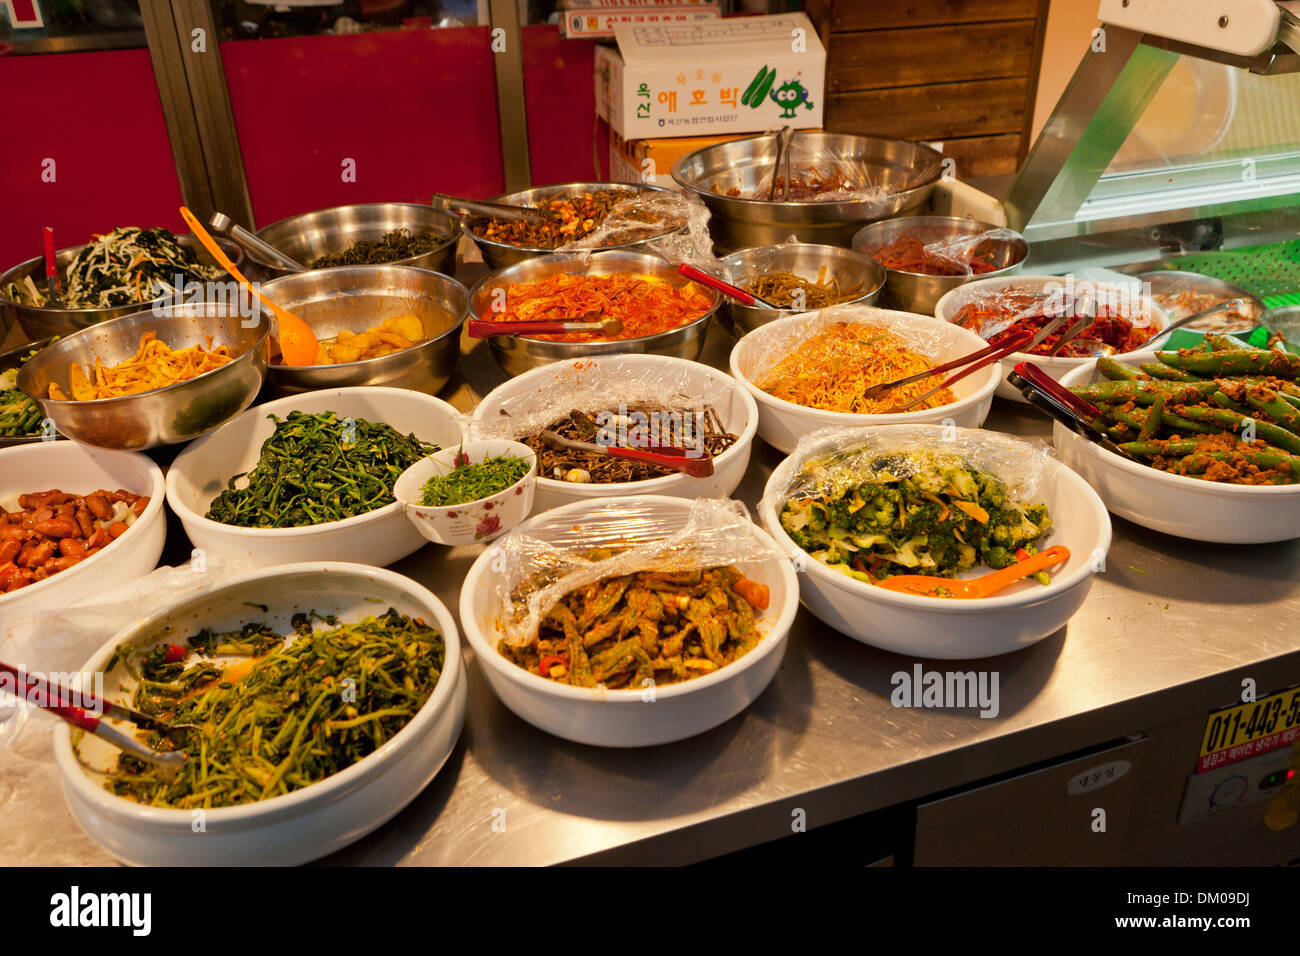 Kimchi and other Korean side dishes displayed for sale at traditional market - Seoul, South Korea Stock Photo